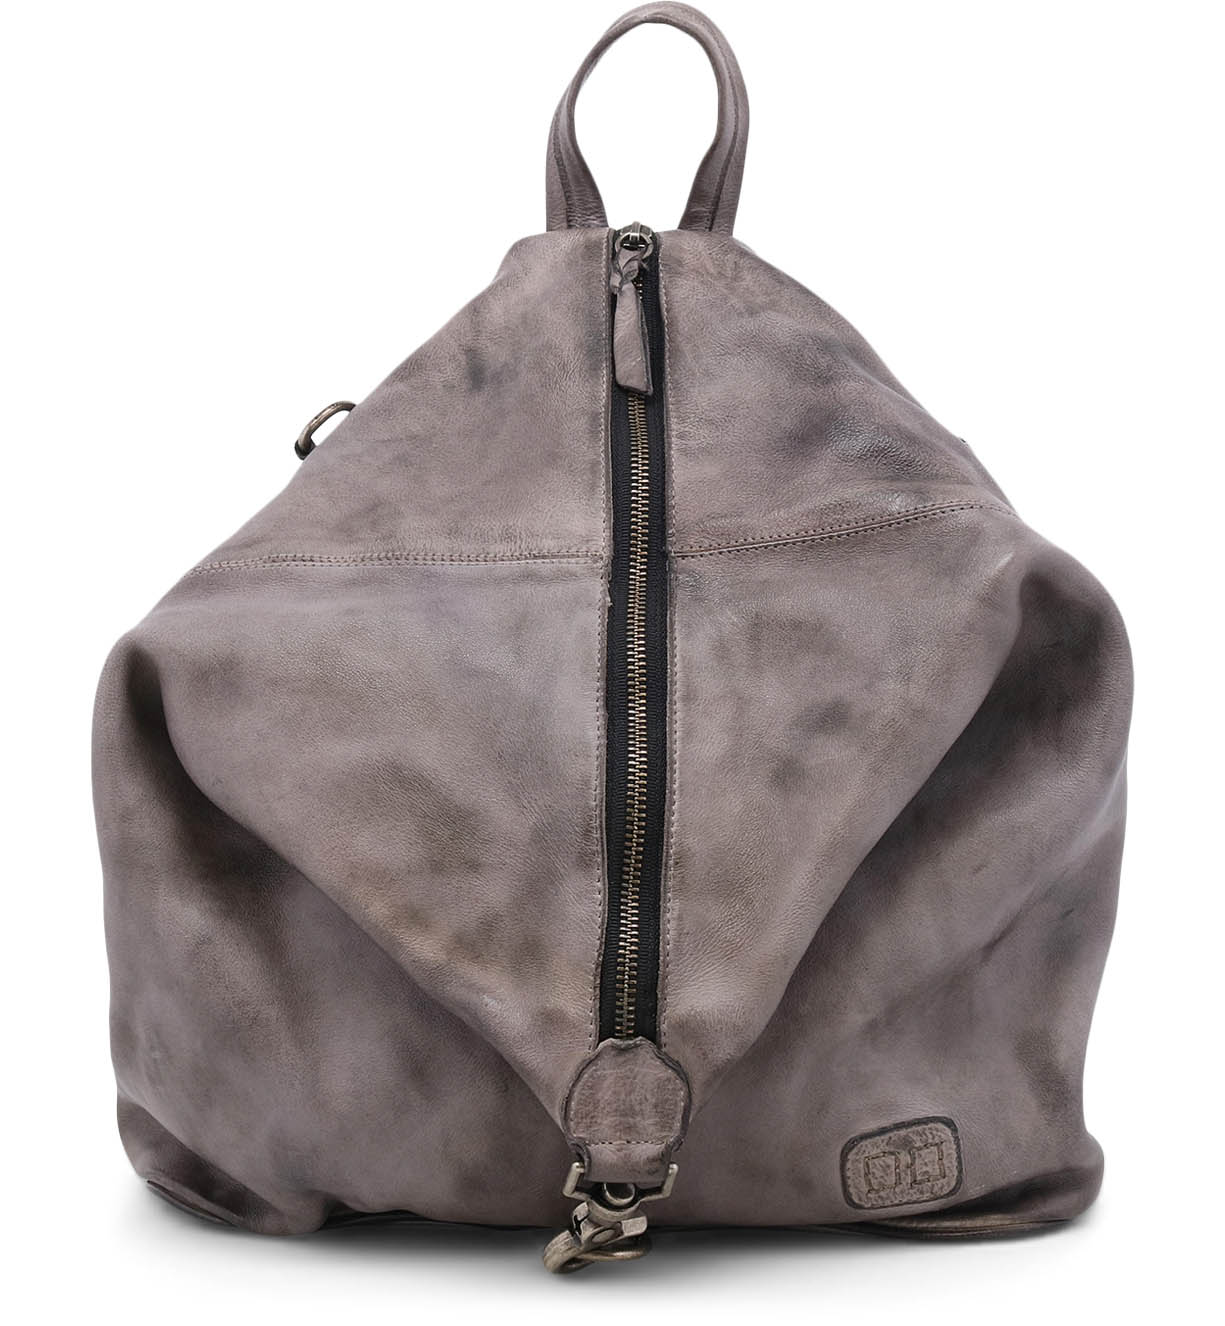 A grey leather Delta backpack with Bed Stu zippers and zippers.